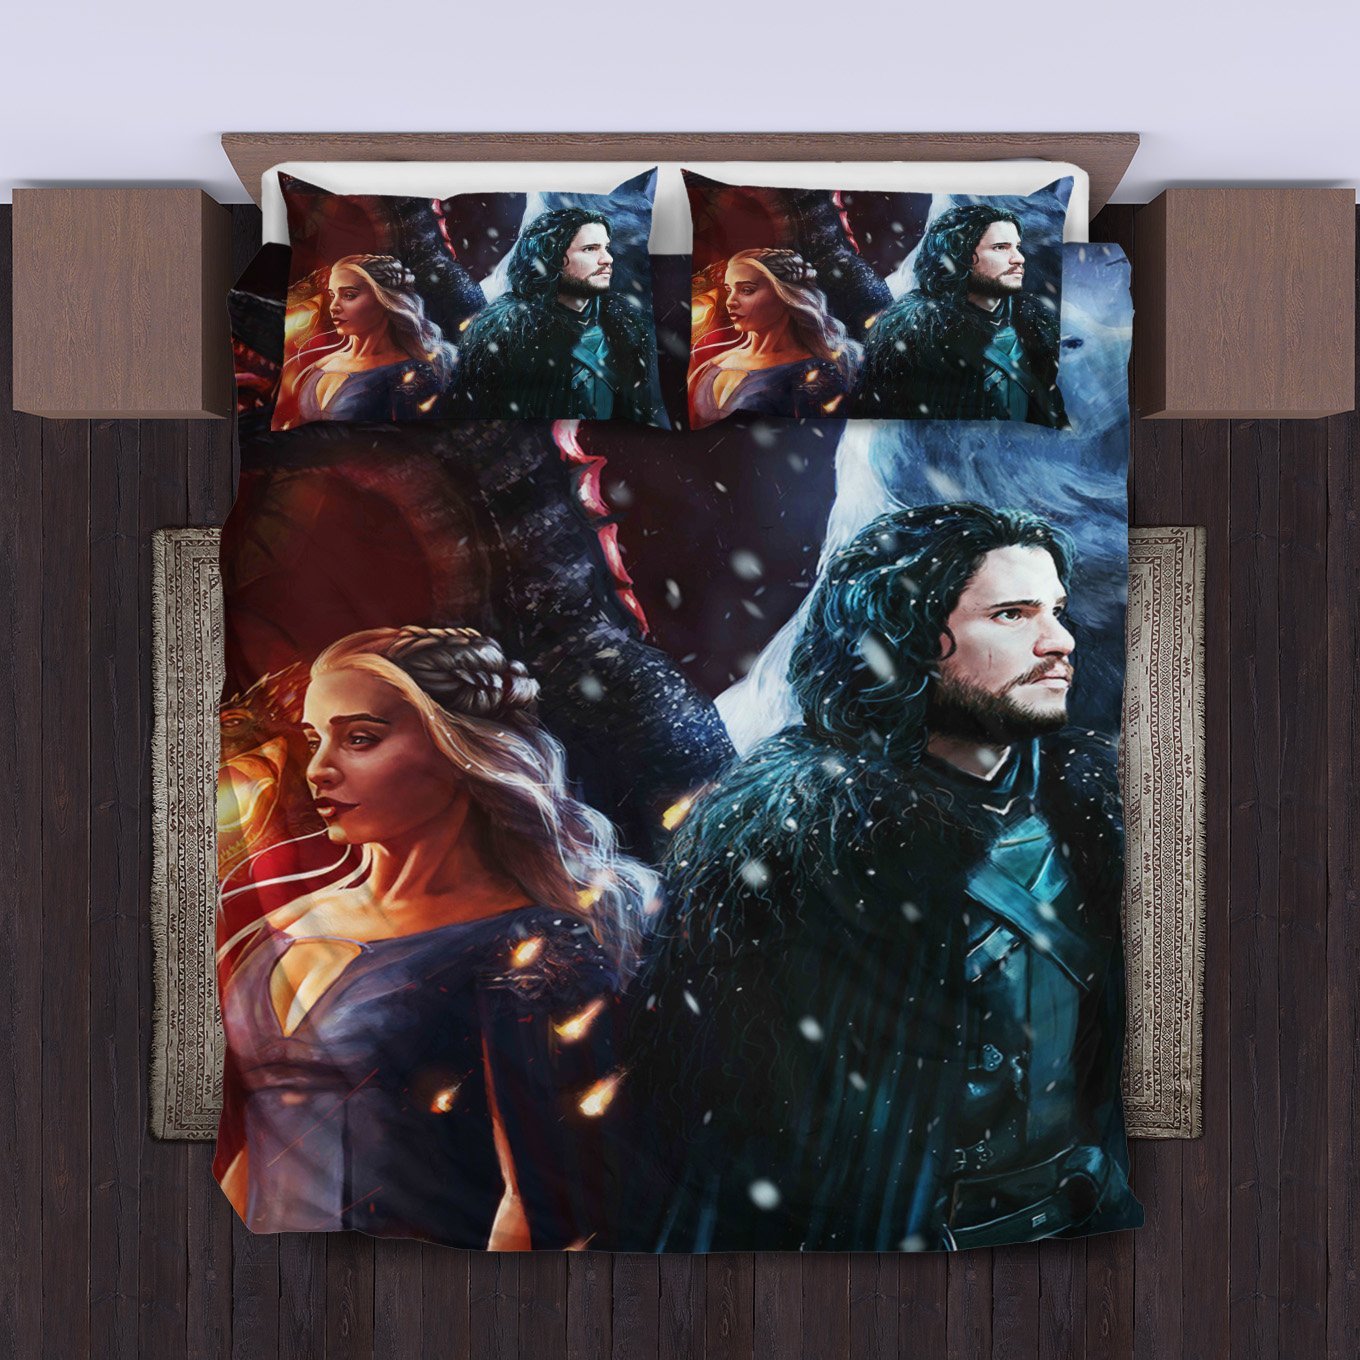 Game Of Throne Bedding Set Duvet Cover And Pillowcase Set